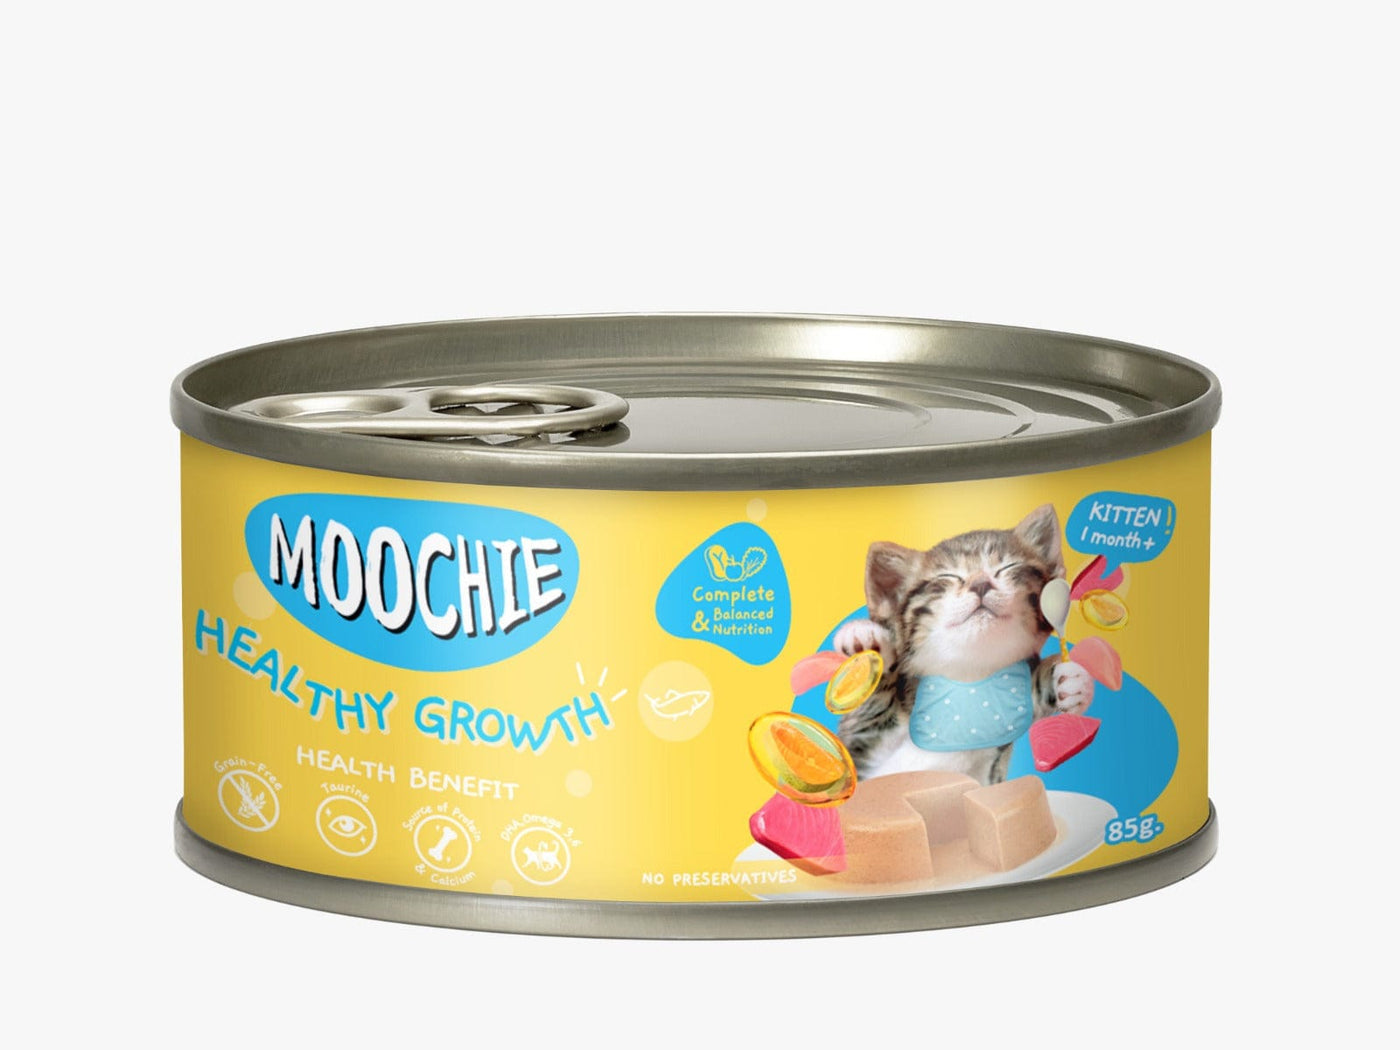 Moochie Kitten Mousse Tuna & Chicken Recipe Pate (Healthy Growth) 24X85G. Can